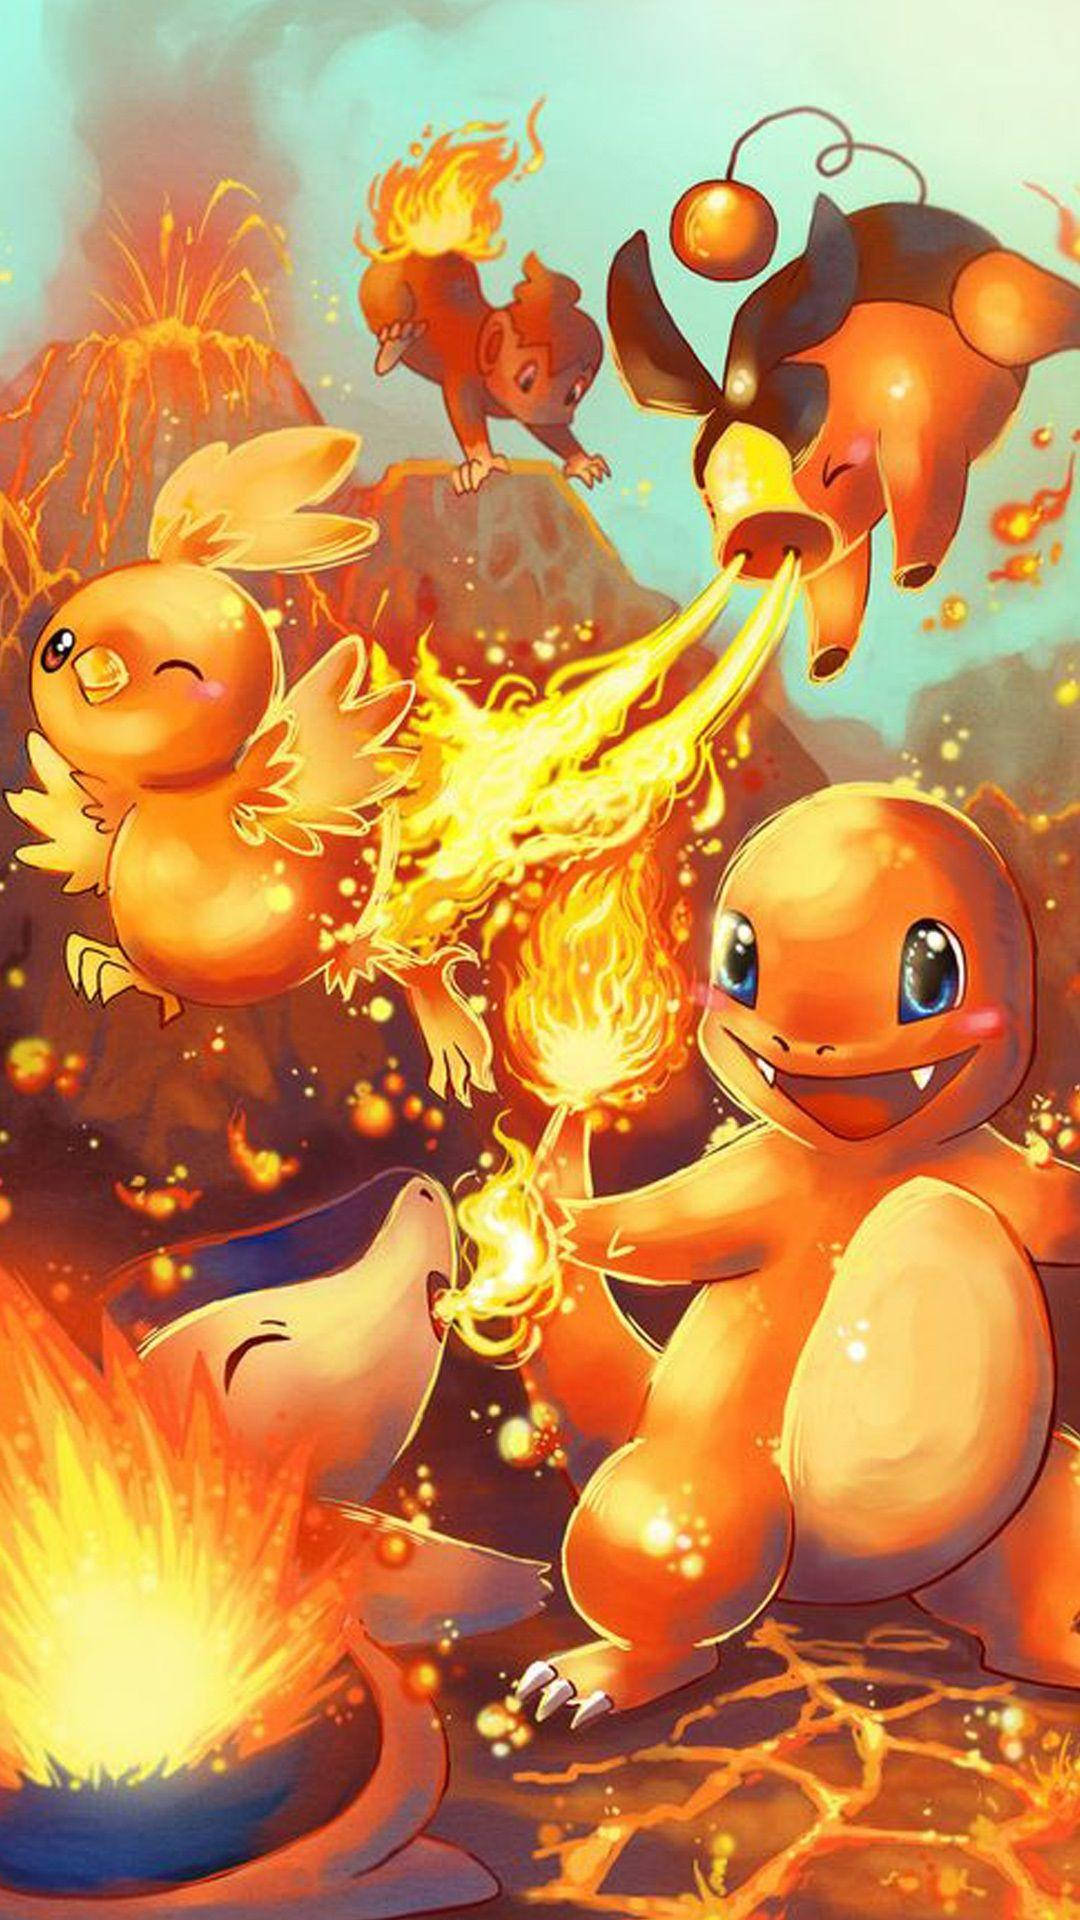 Fire-type Pokemon With Charmander